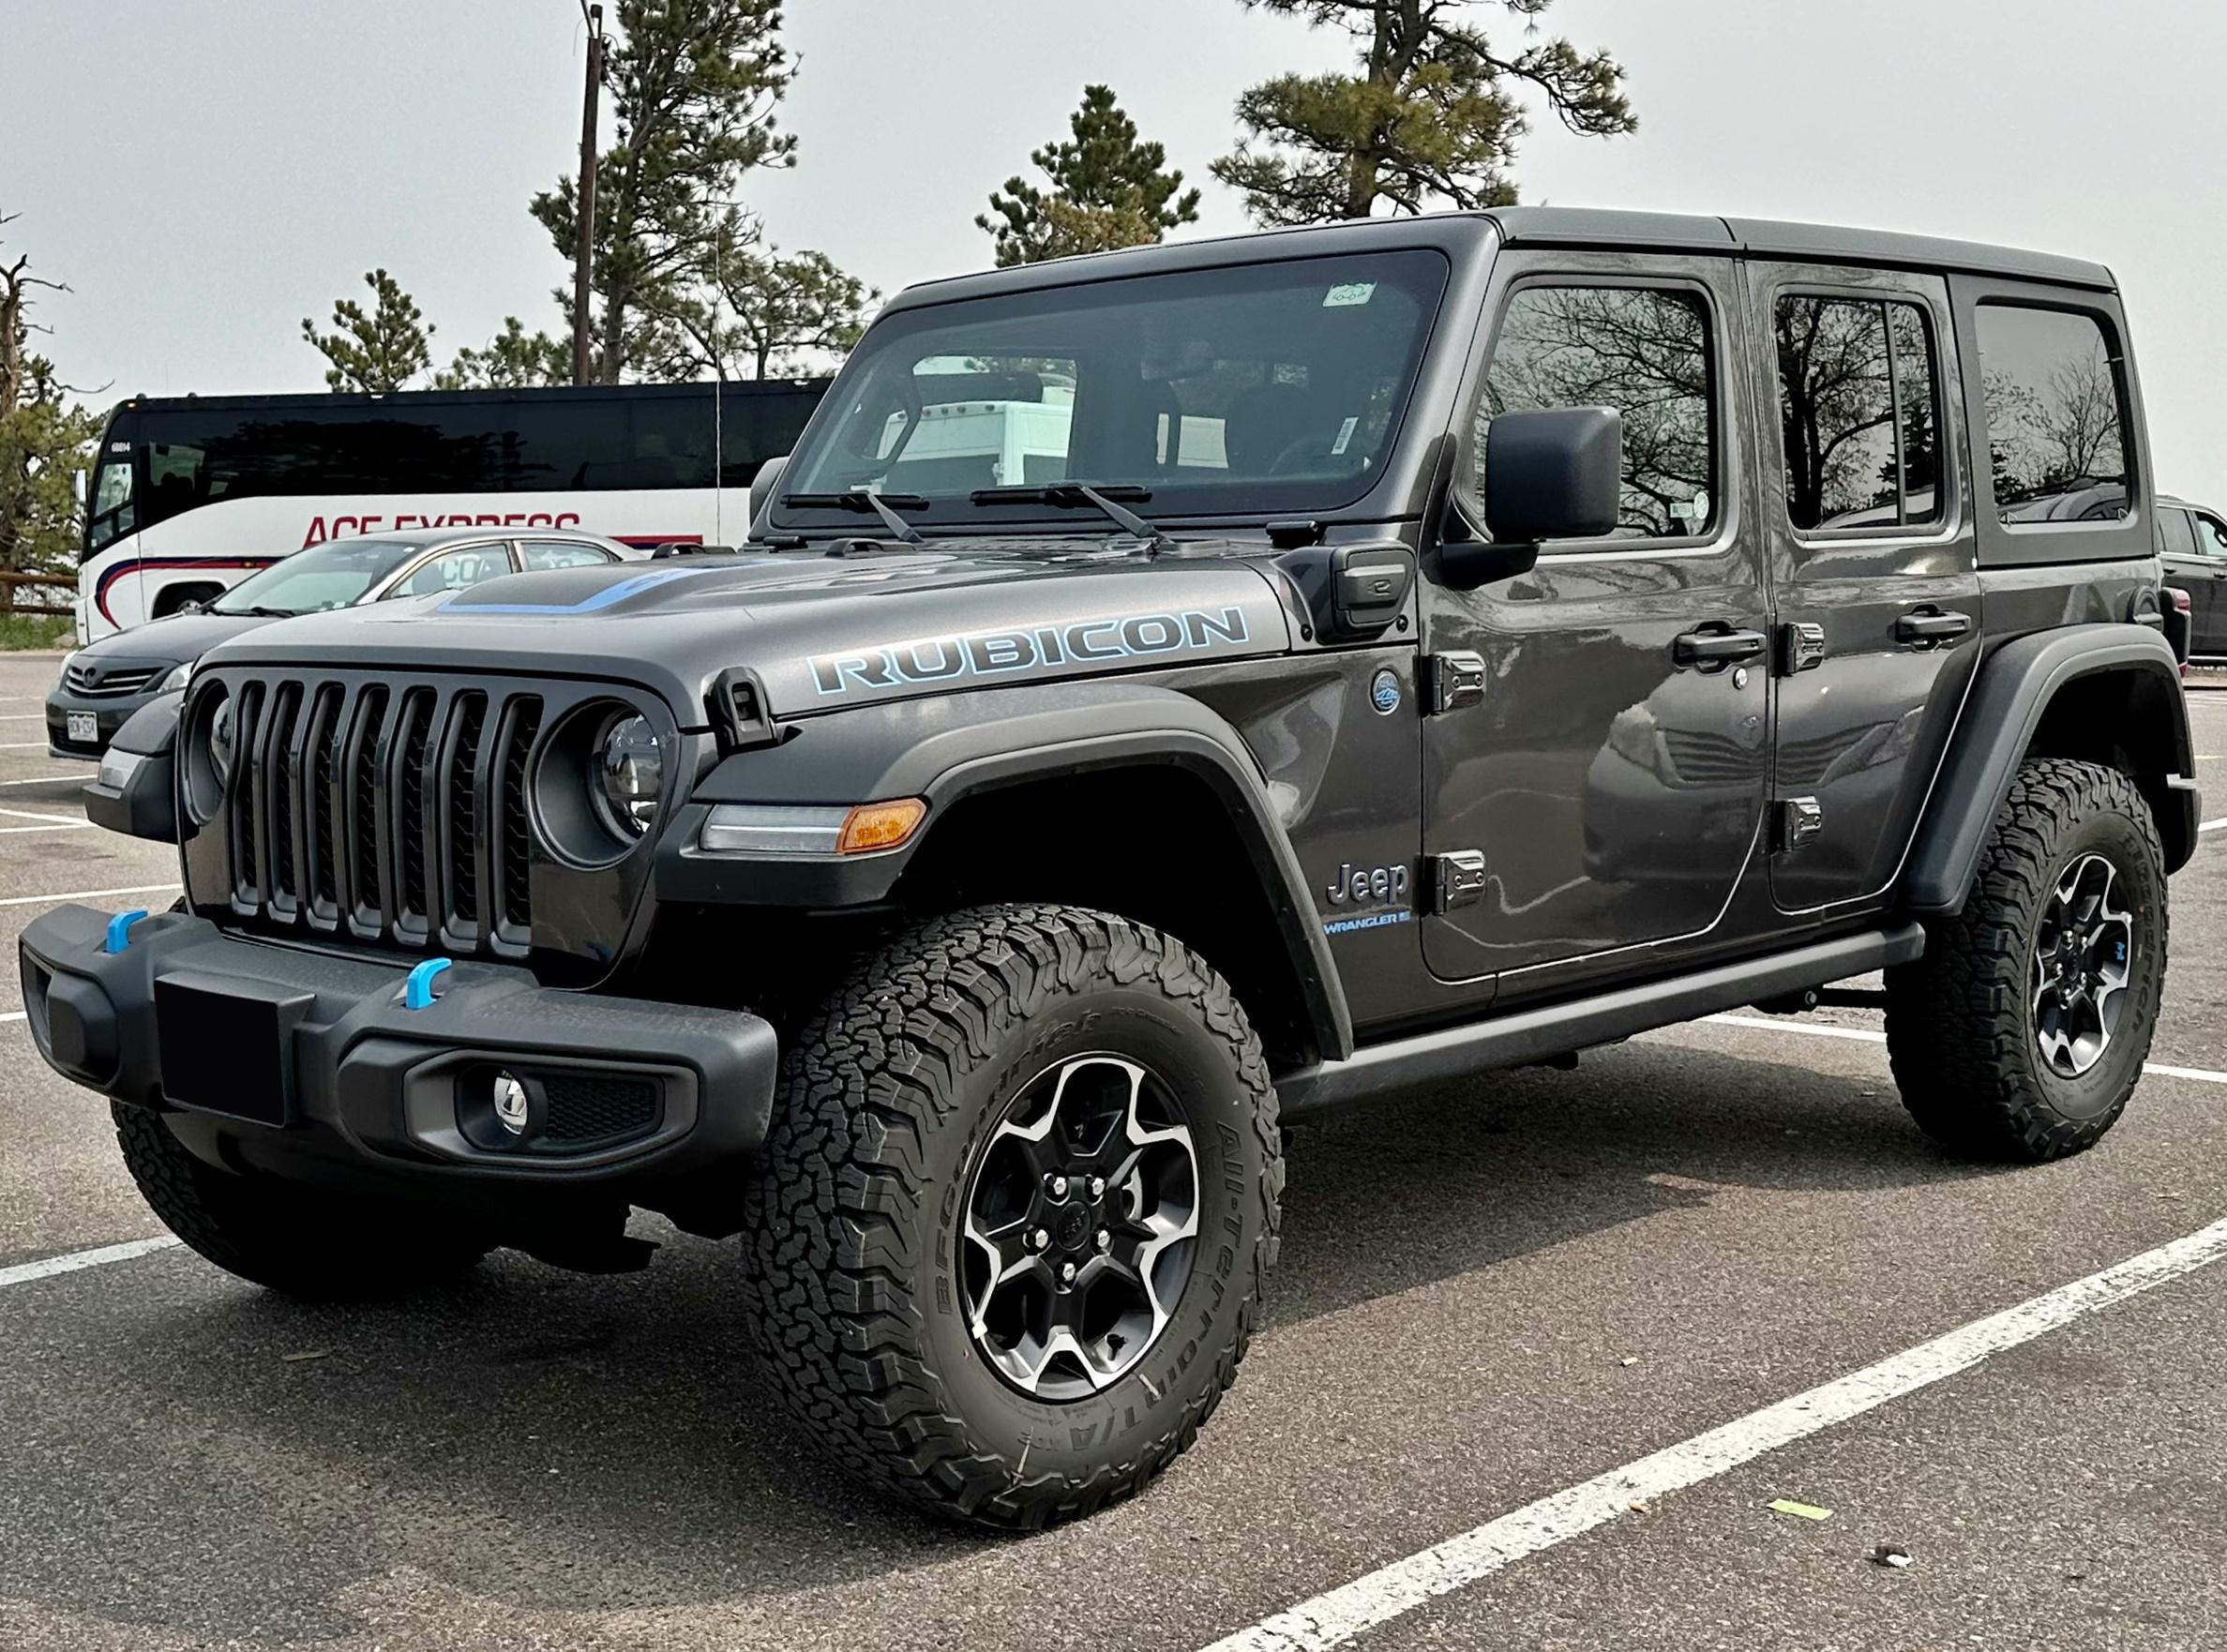 Introduction: Understanding the phenomenon of Death Wobble in Jeep Wrangler